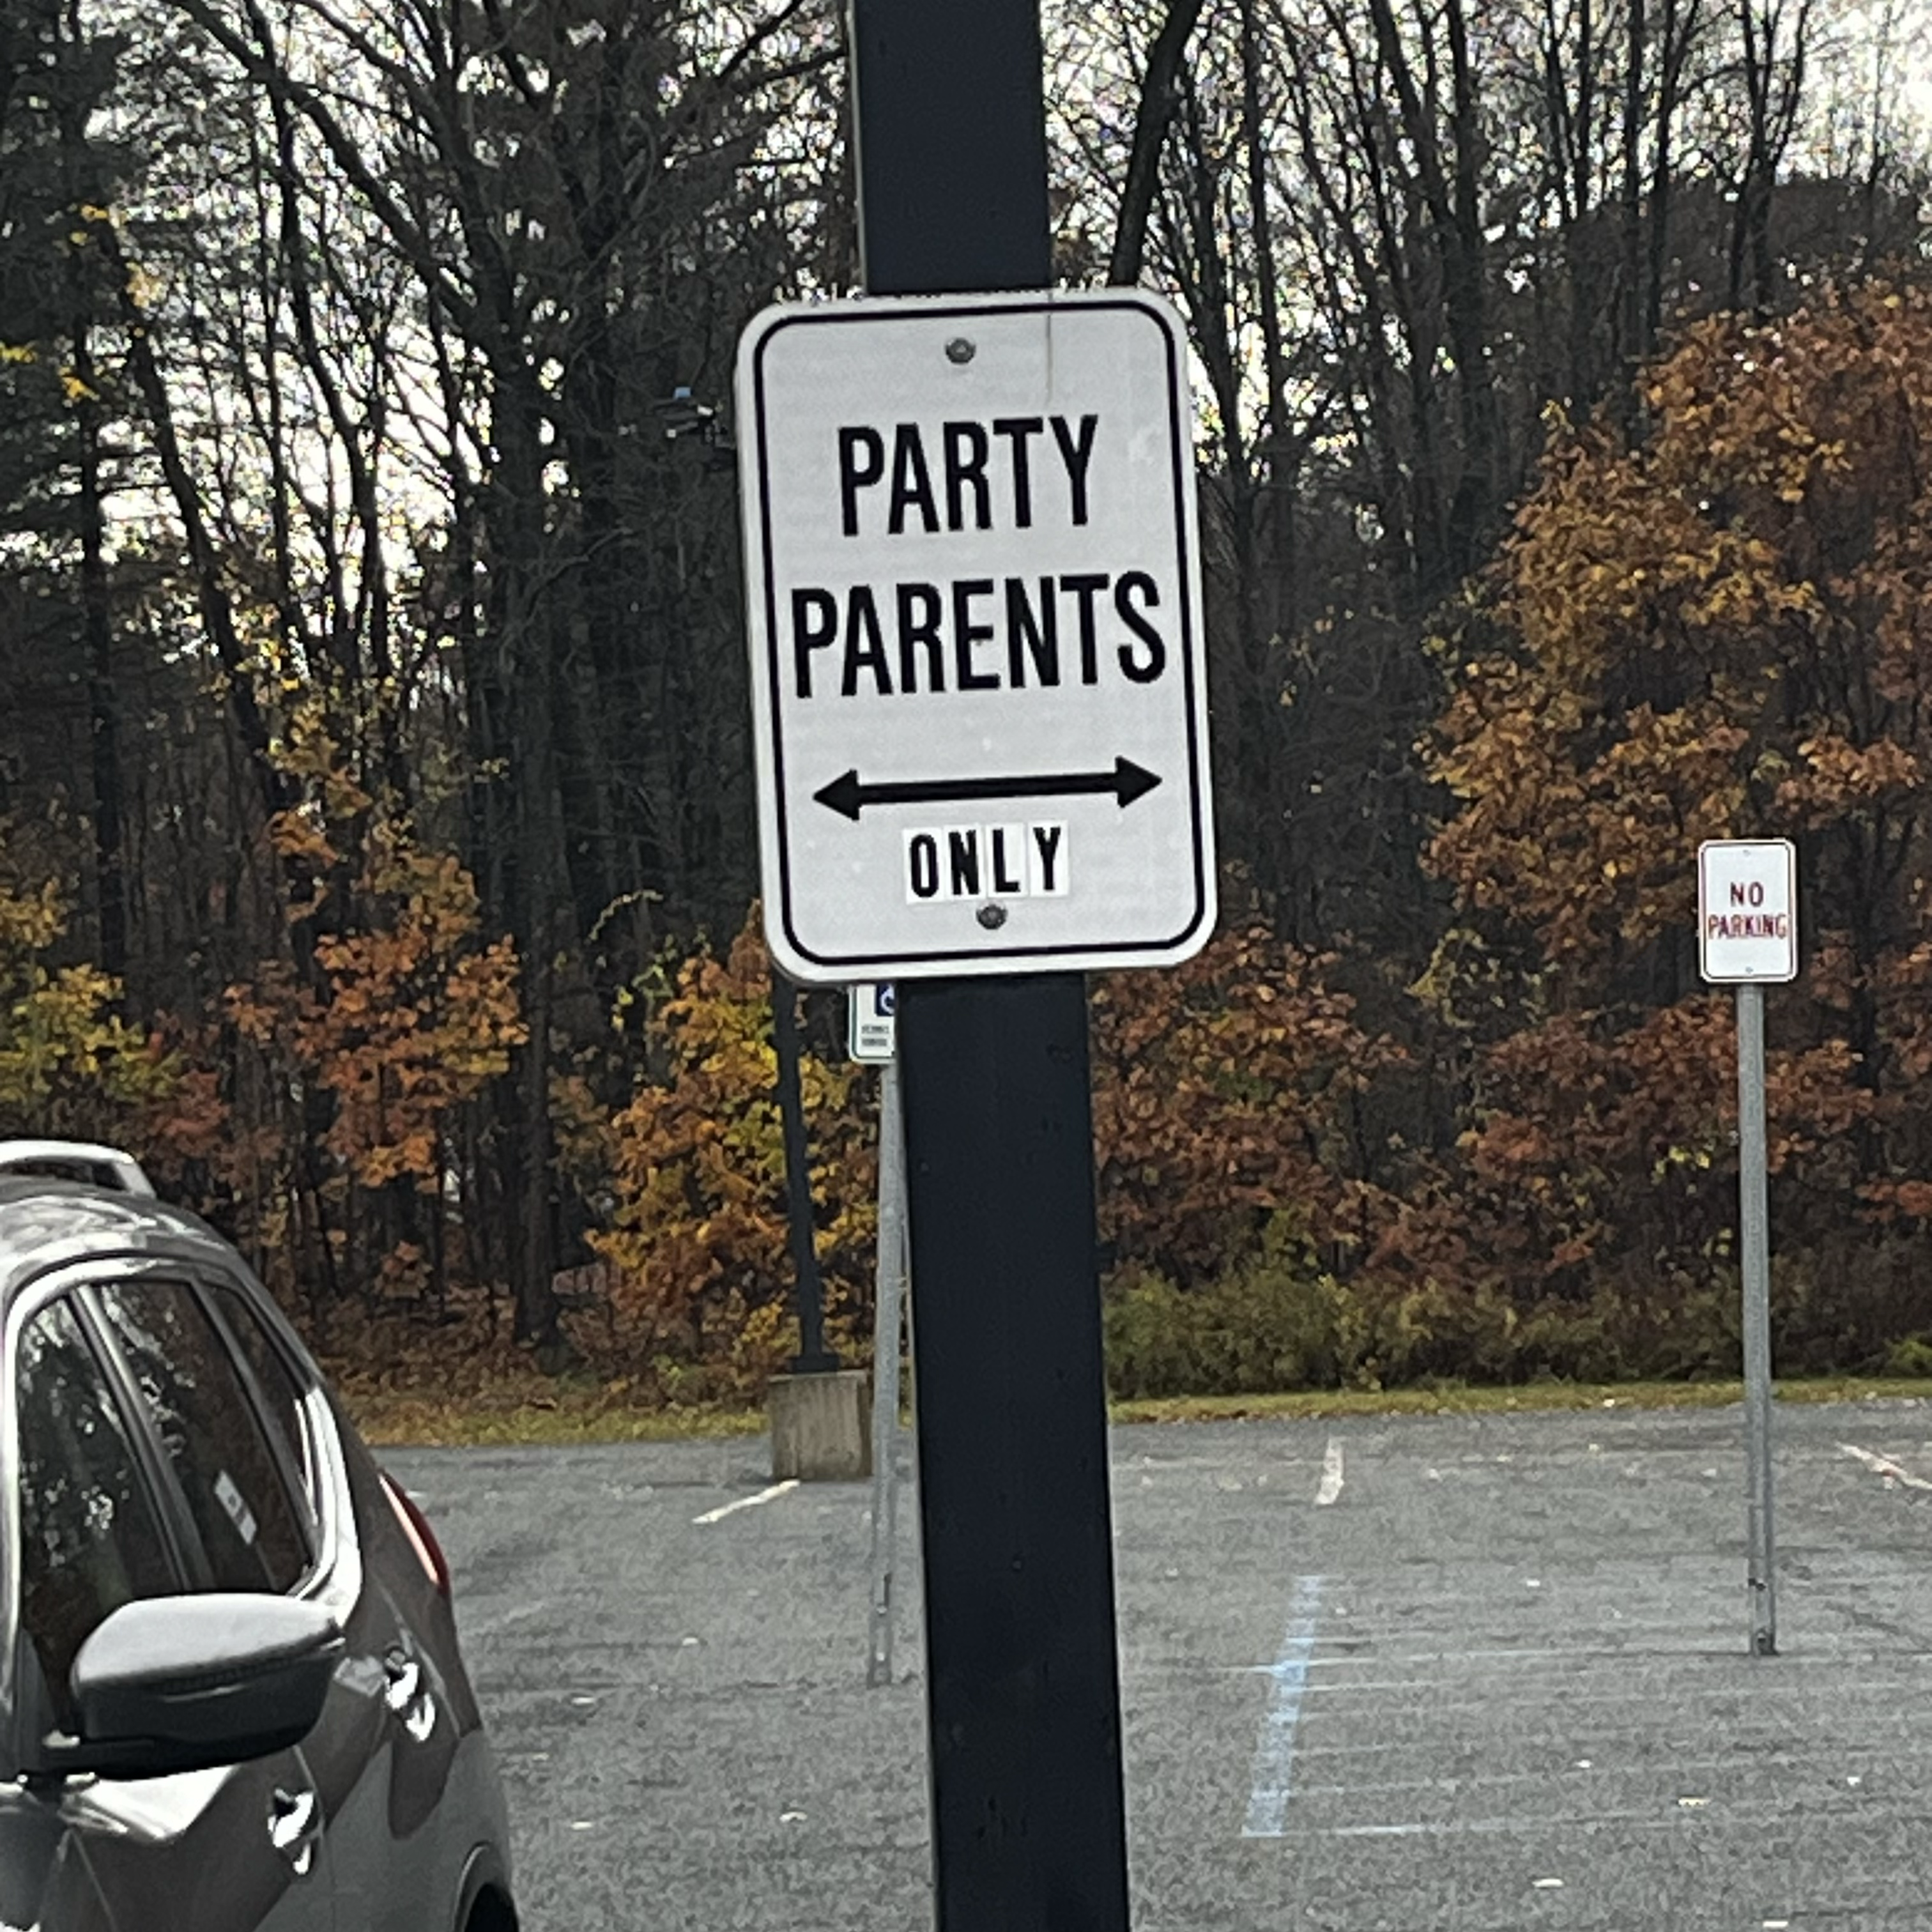 A parking sign for “party parents only”.